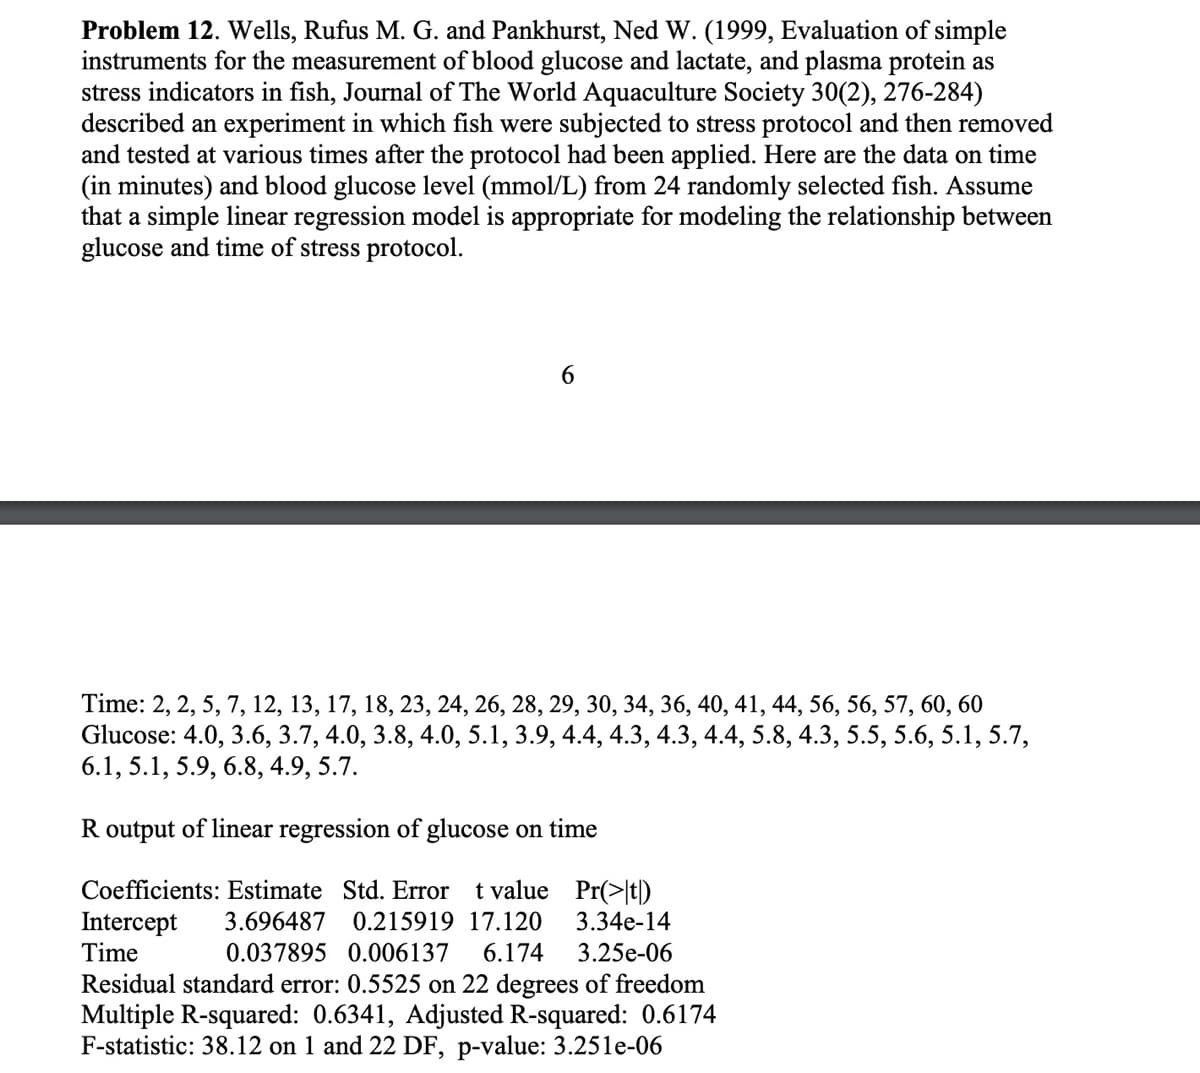 Problem 12. Wells, Rufus M. G. and Pankhurst, Ned W. (1999, Evaluation of simple
instruments for the measurement of blood glucose and lactate, and plasma protein as
stress indicators in fish, Journal of The World Aquaculture Society 30(2), 276-284)
described an experiment in which fish were subjected to stress protocol and then removed
and tested at various times after the protocol had been applied. Here are the data on time
(in minutes) and blood glucose level (mmol/L) from 24 randomly selected fish. Assume
that a simple linear regression model is appropriate for modeling the relationship between
glucose and time of stress protocol.
Time: 2, 2, 5, 7, 12, 13, 17, 18, 23, 24, 26, 28, 29, 30, 34, 36, 40, 41, 44, 56, 56, 57, 60, 60
Glucose: 4.0, 3.6, 3.7, 4.0, 3.8, 4.0, 5.1, 3.9, 4.4, 4.3, 4.3, 4.4, 5.8, 4.3, 5.5, 5.6, 5.1, 5.7,
6.1, 5.1, 5.9, 6.8, 4.9, 5.7.
R output of linear regression of glucose on time
Coefficients: Estimate Std. Error t value Pr(>|t|)
Intercept 3.696487 0.215919 17.120 3.34e-14
Time
0.037895 0.006137 6.174 3.25e-06
Residual standard error: 0.5525 on 22 degrees of freedom
Multiple R-squared: 0.6341, Adjusted R-squared: 0.6174
F-statistic: 38.12 on 1 and 22 DF, p-value: 3.251e-06